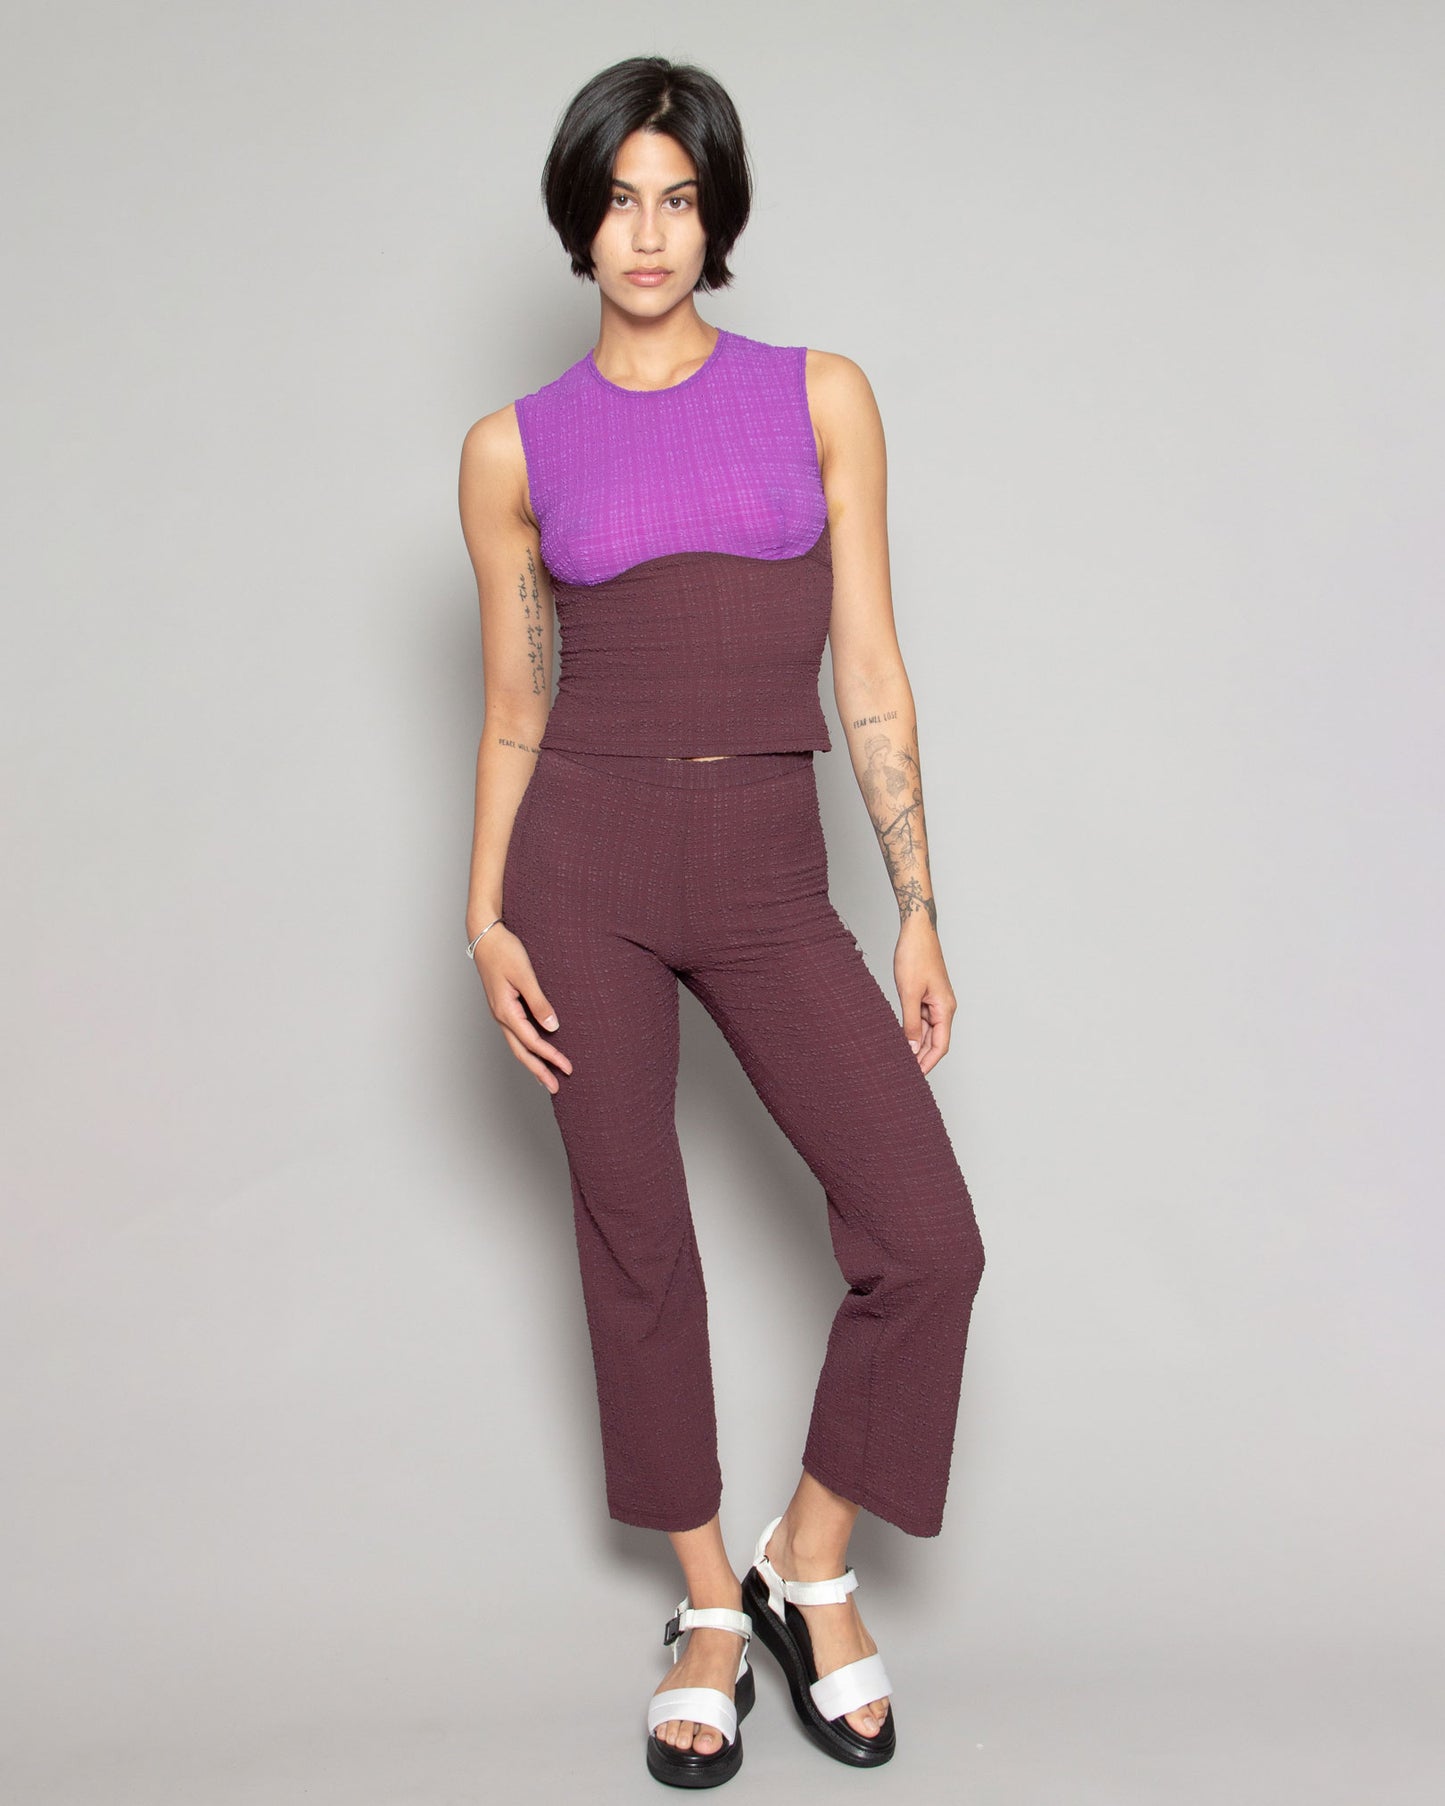 RACHEL COMEY Mando Pant in Maroon Stretchy Check available at Lahn.shop